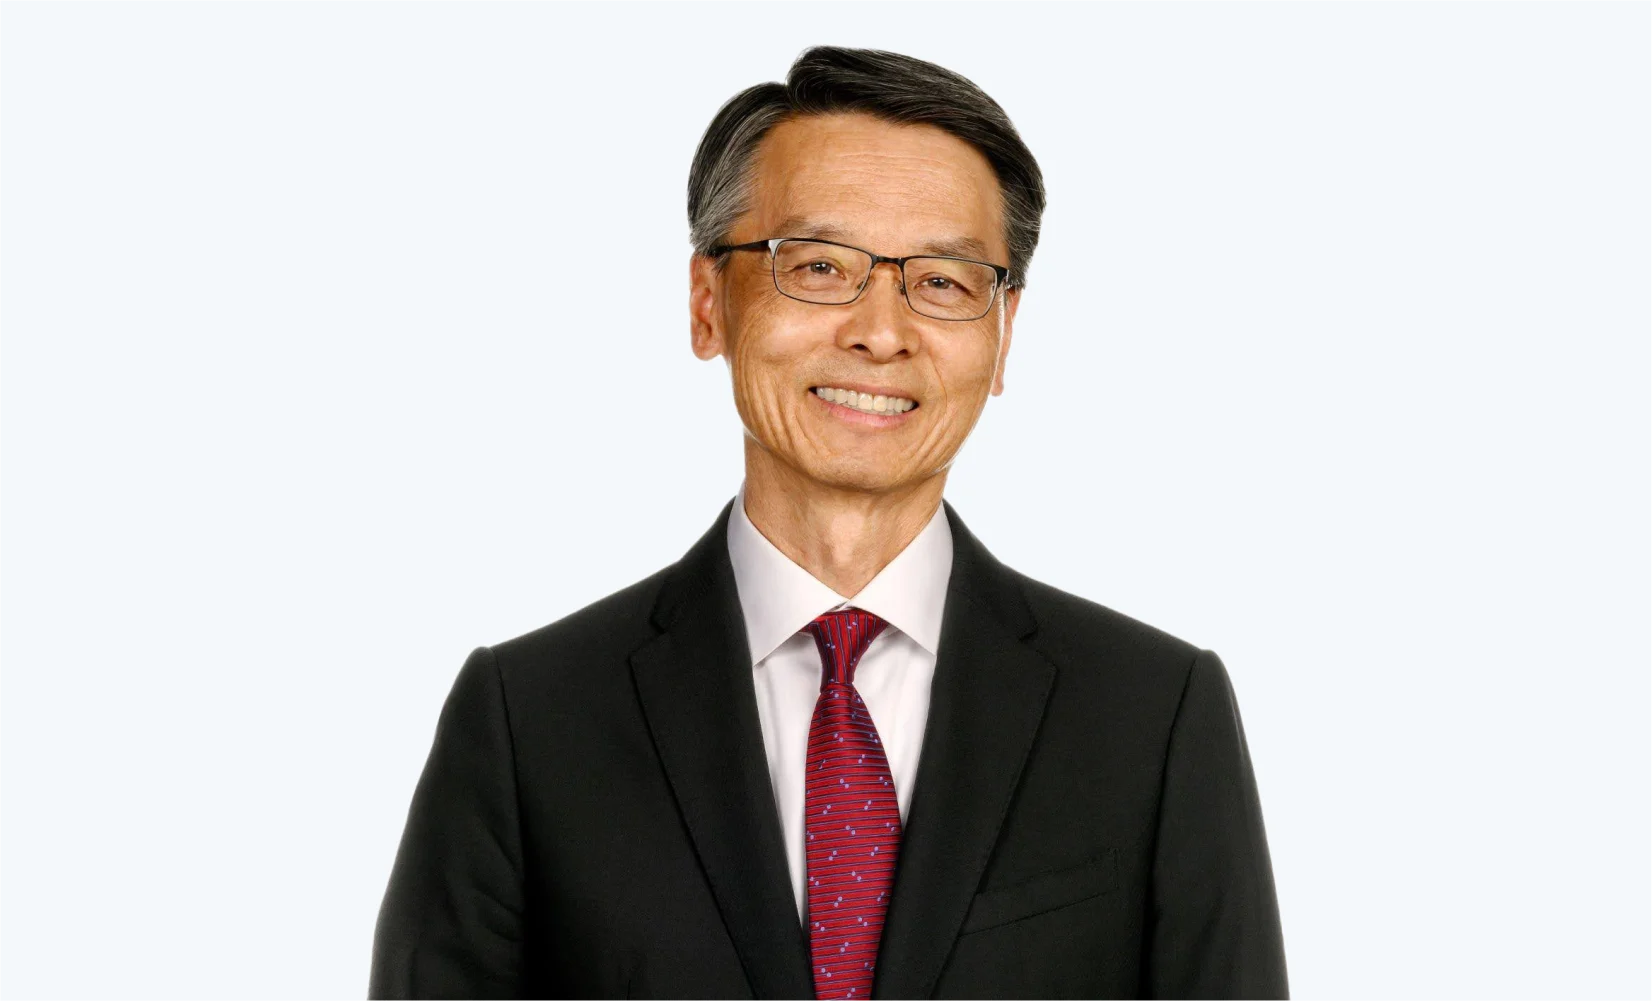 Raymond T. Chan, Chair of the Pension Committee, and member of the People, Culture and Compensation Committee